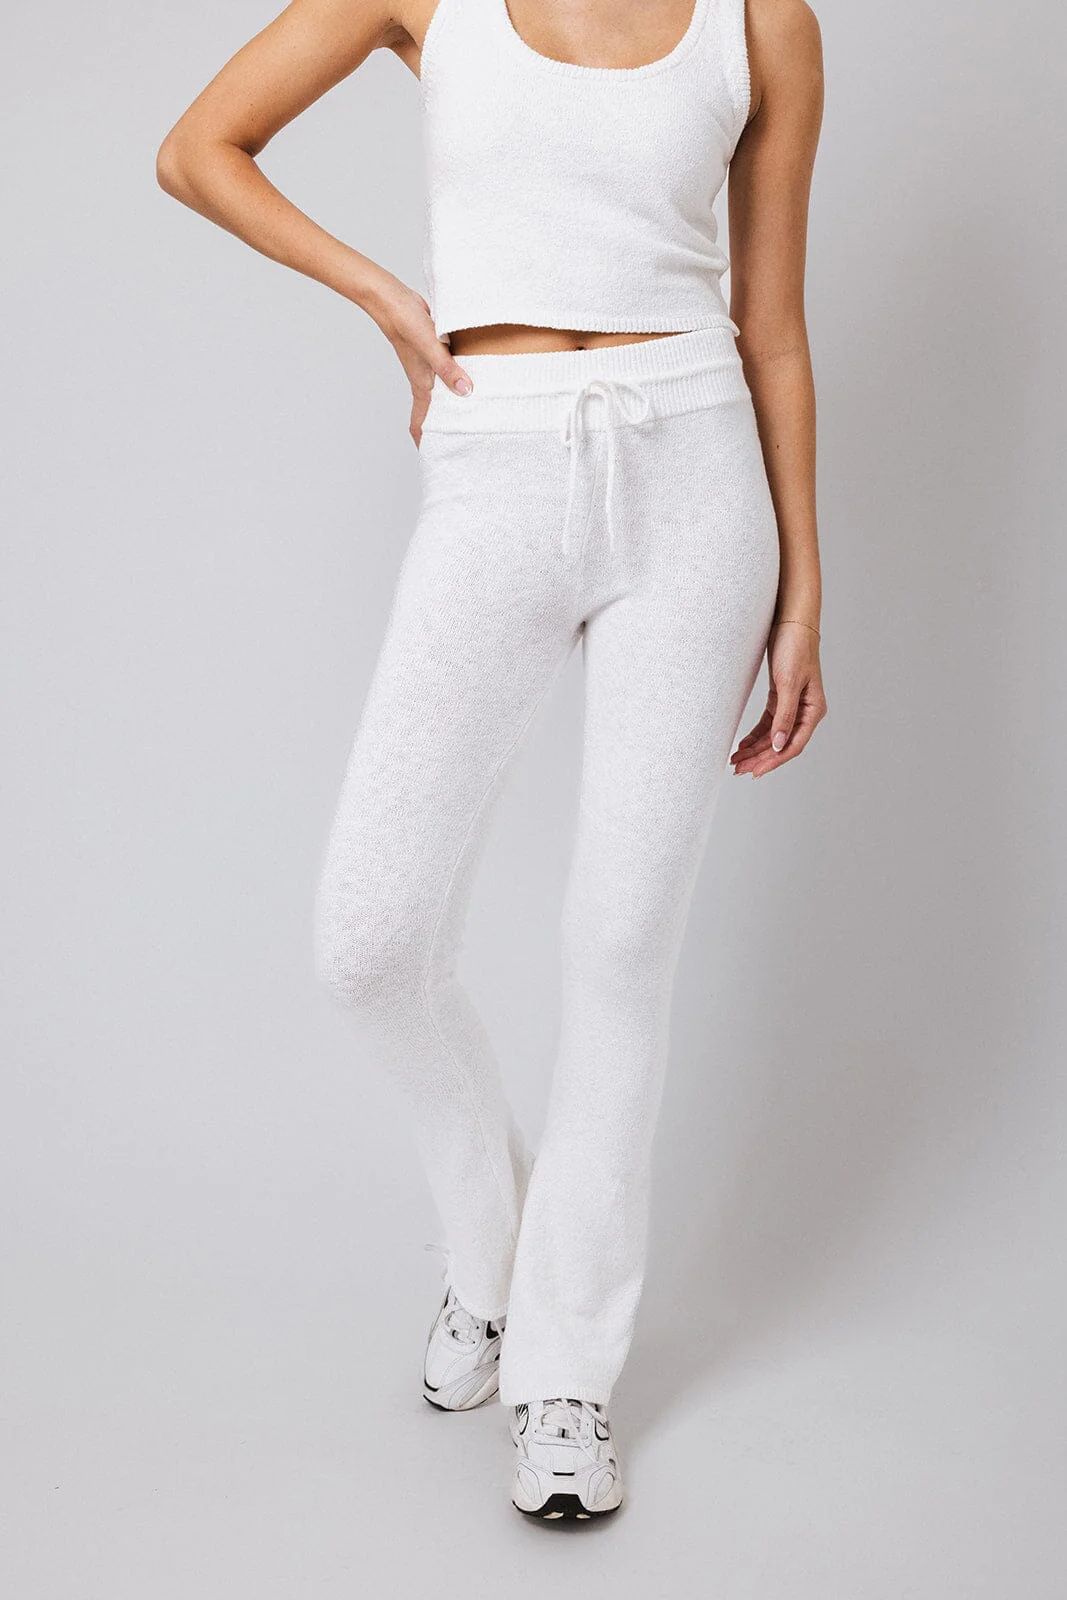 Boucle Flared Drawstring Pant | IVL COLLECTIVE